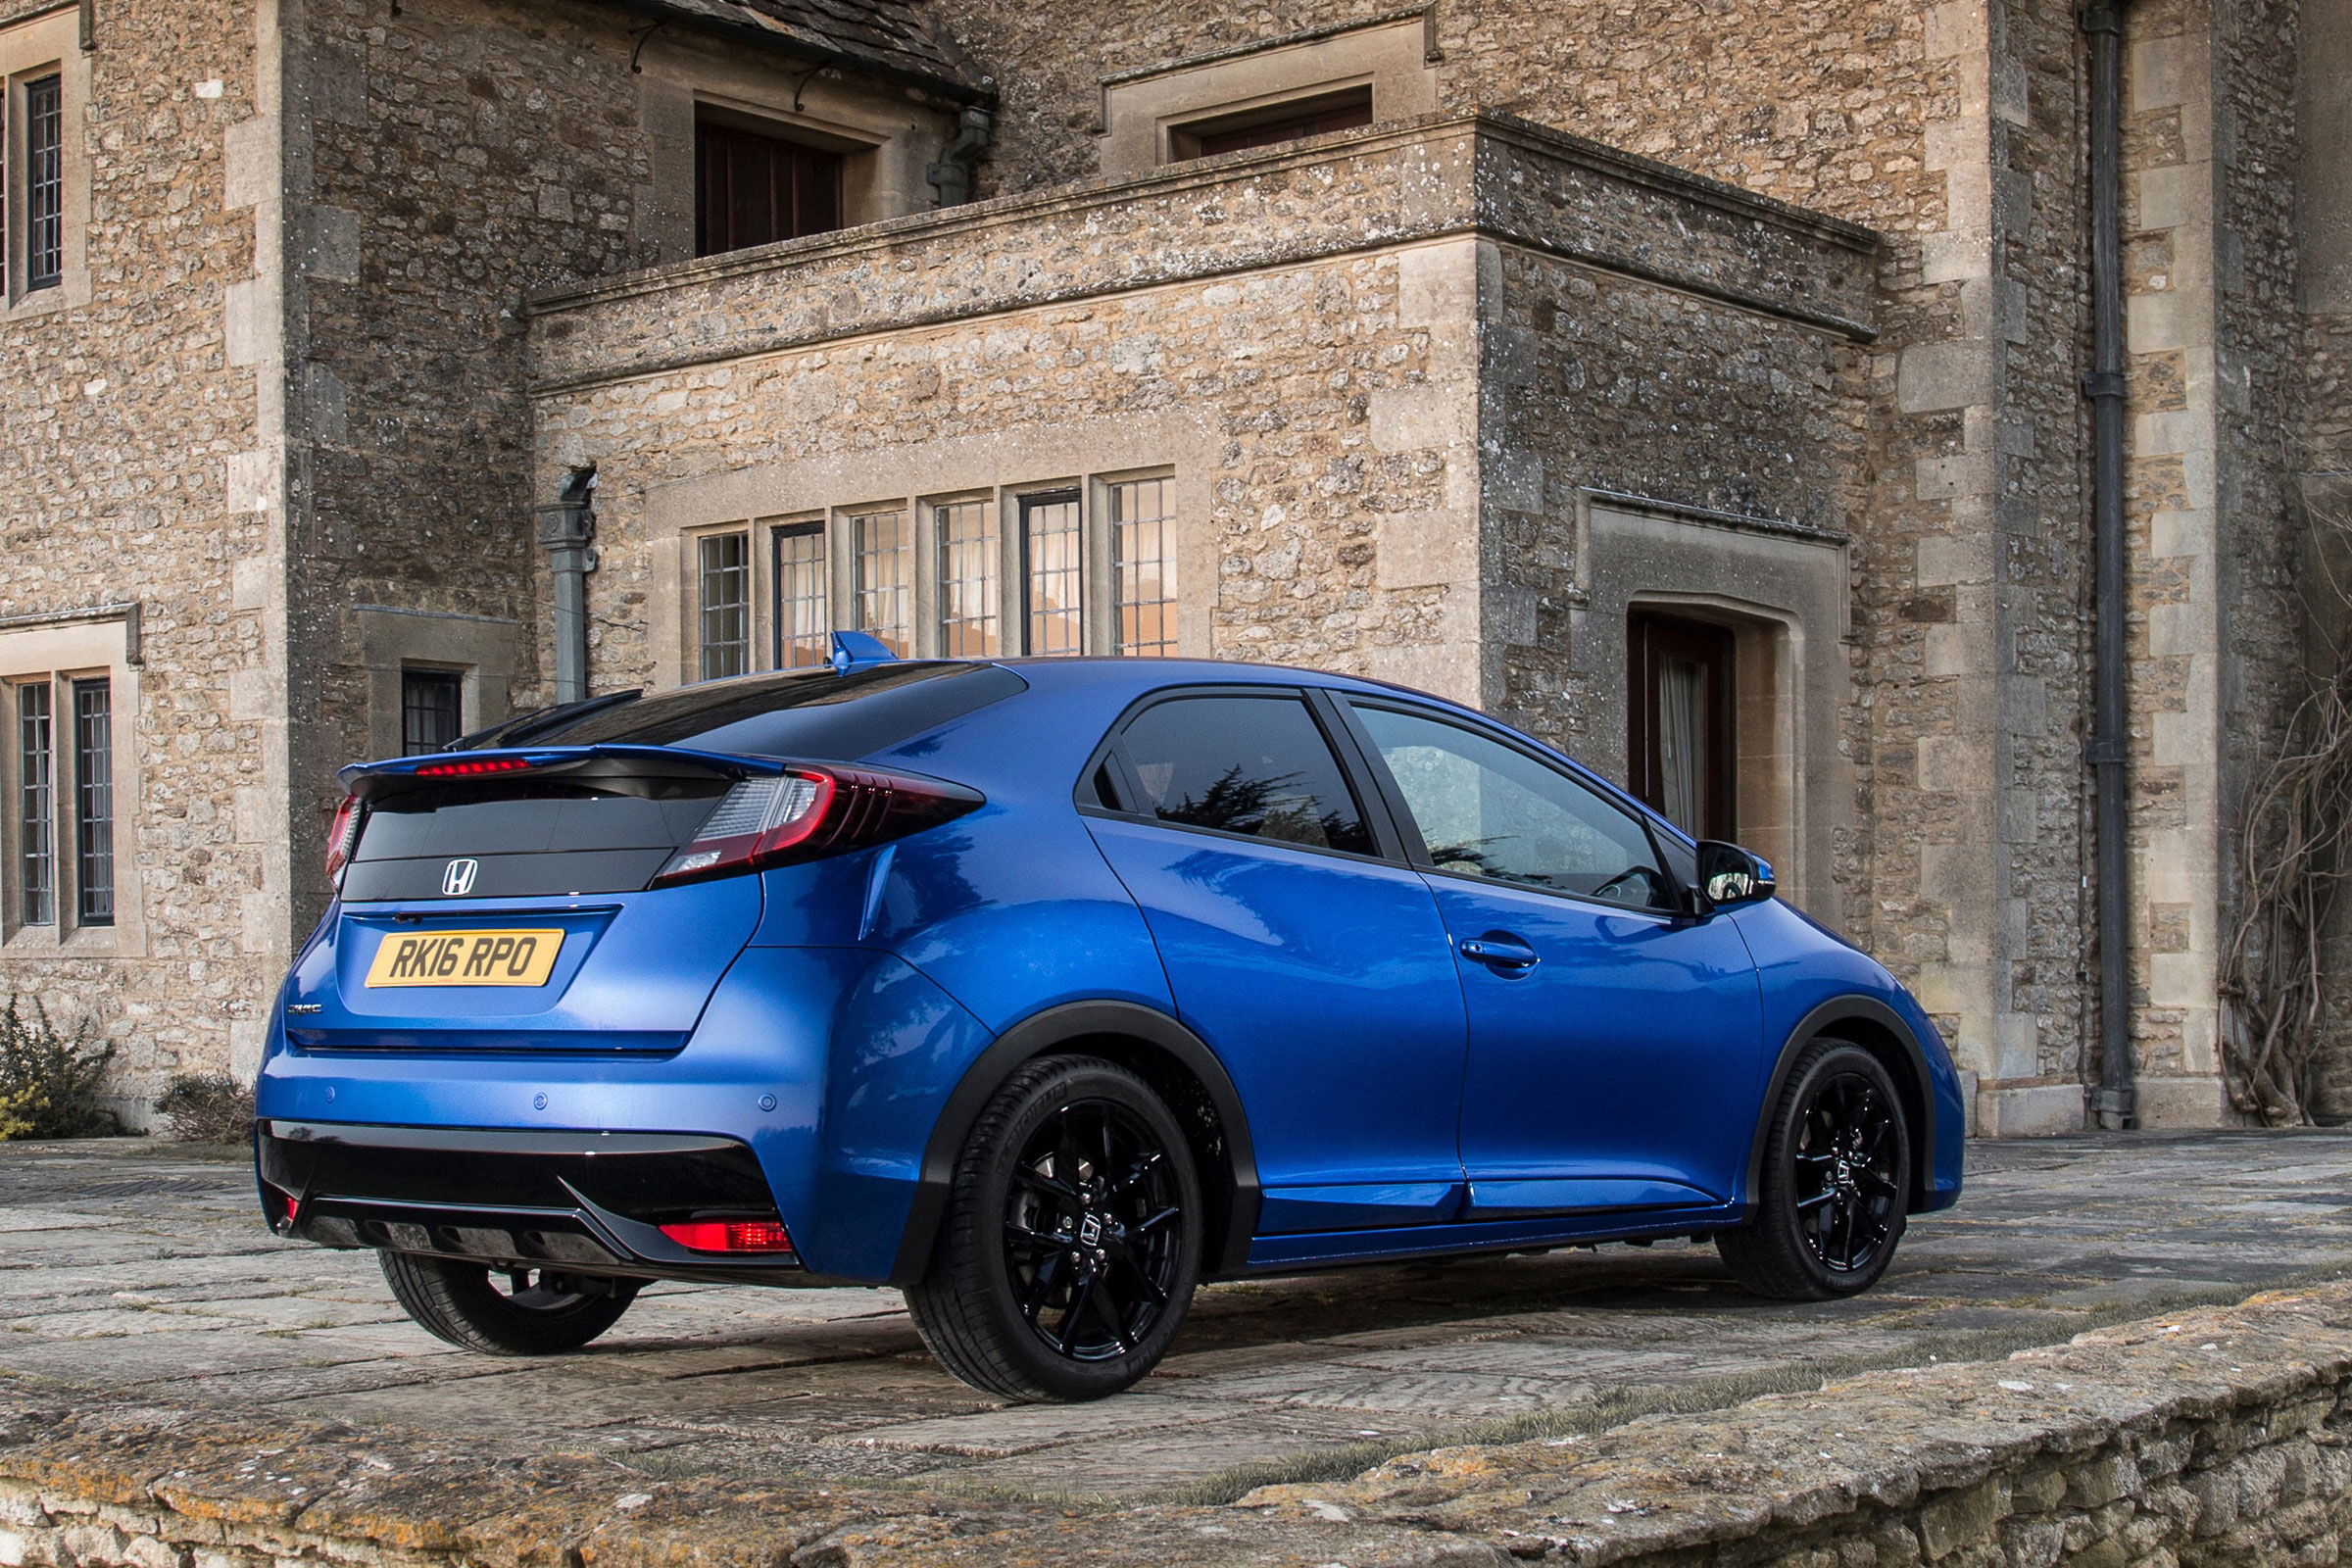 Sporty Civic for £18k? Honda launches 1.4litre iVTEC